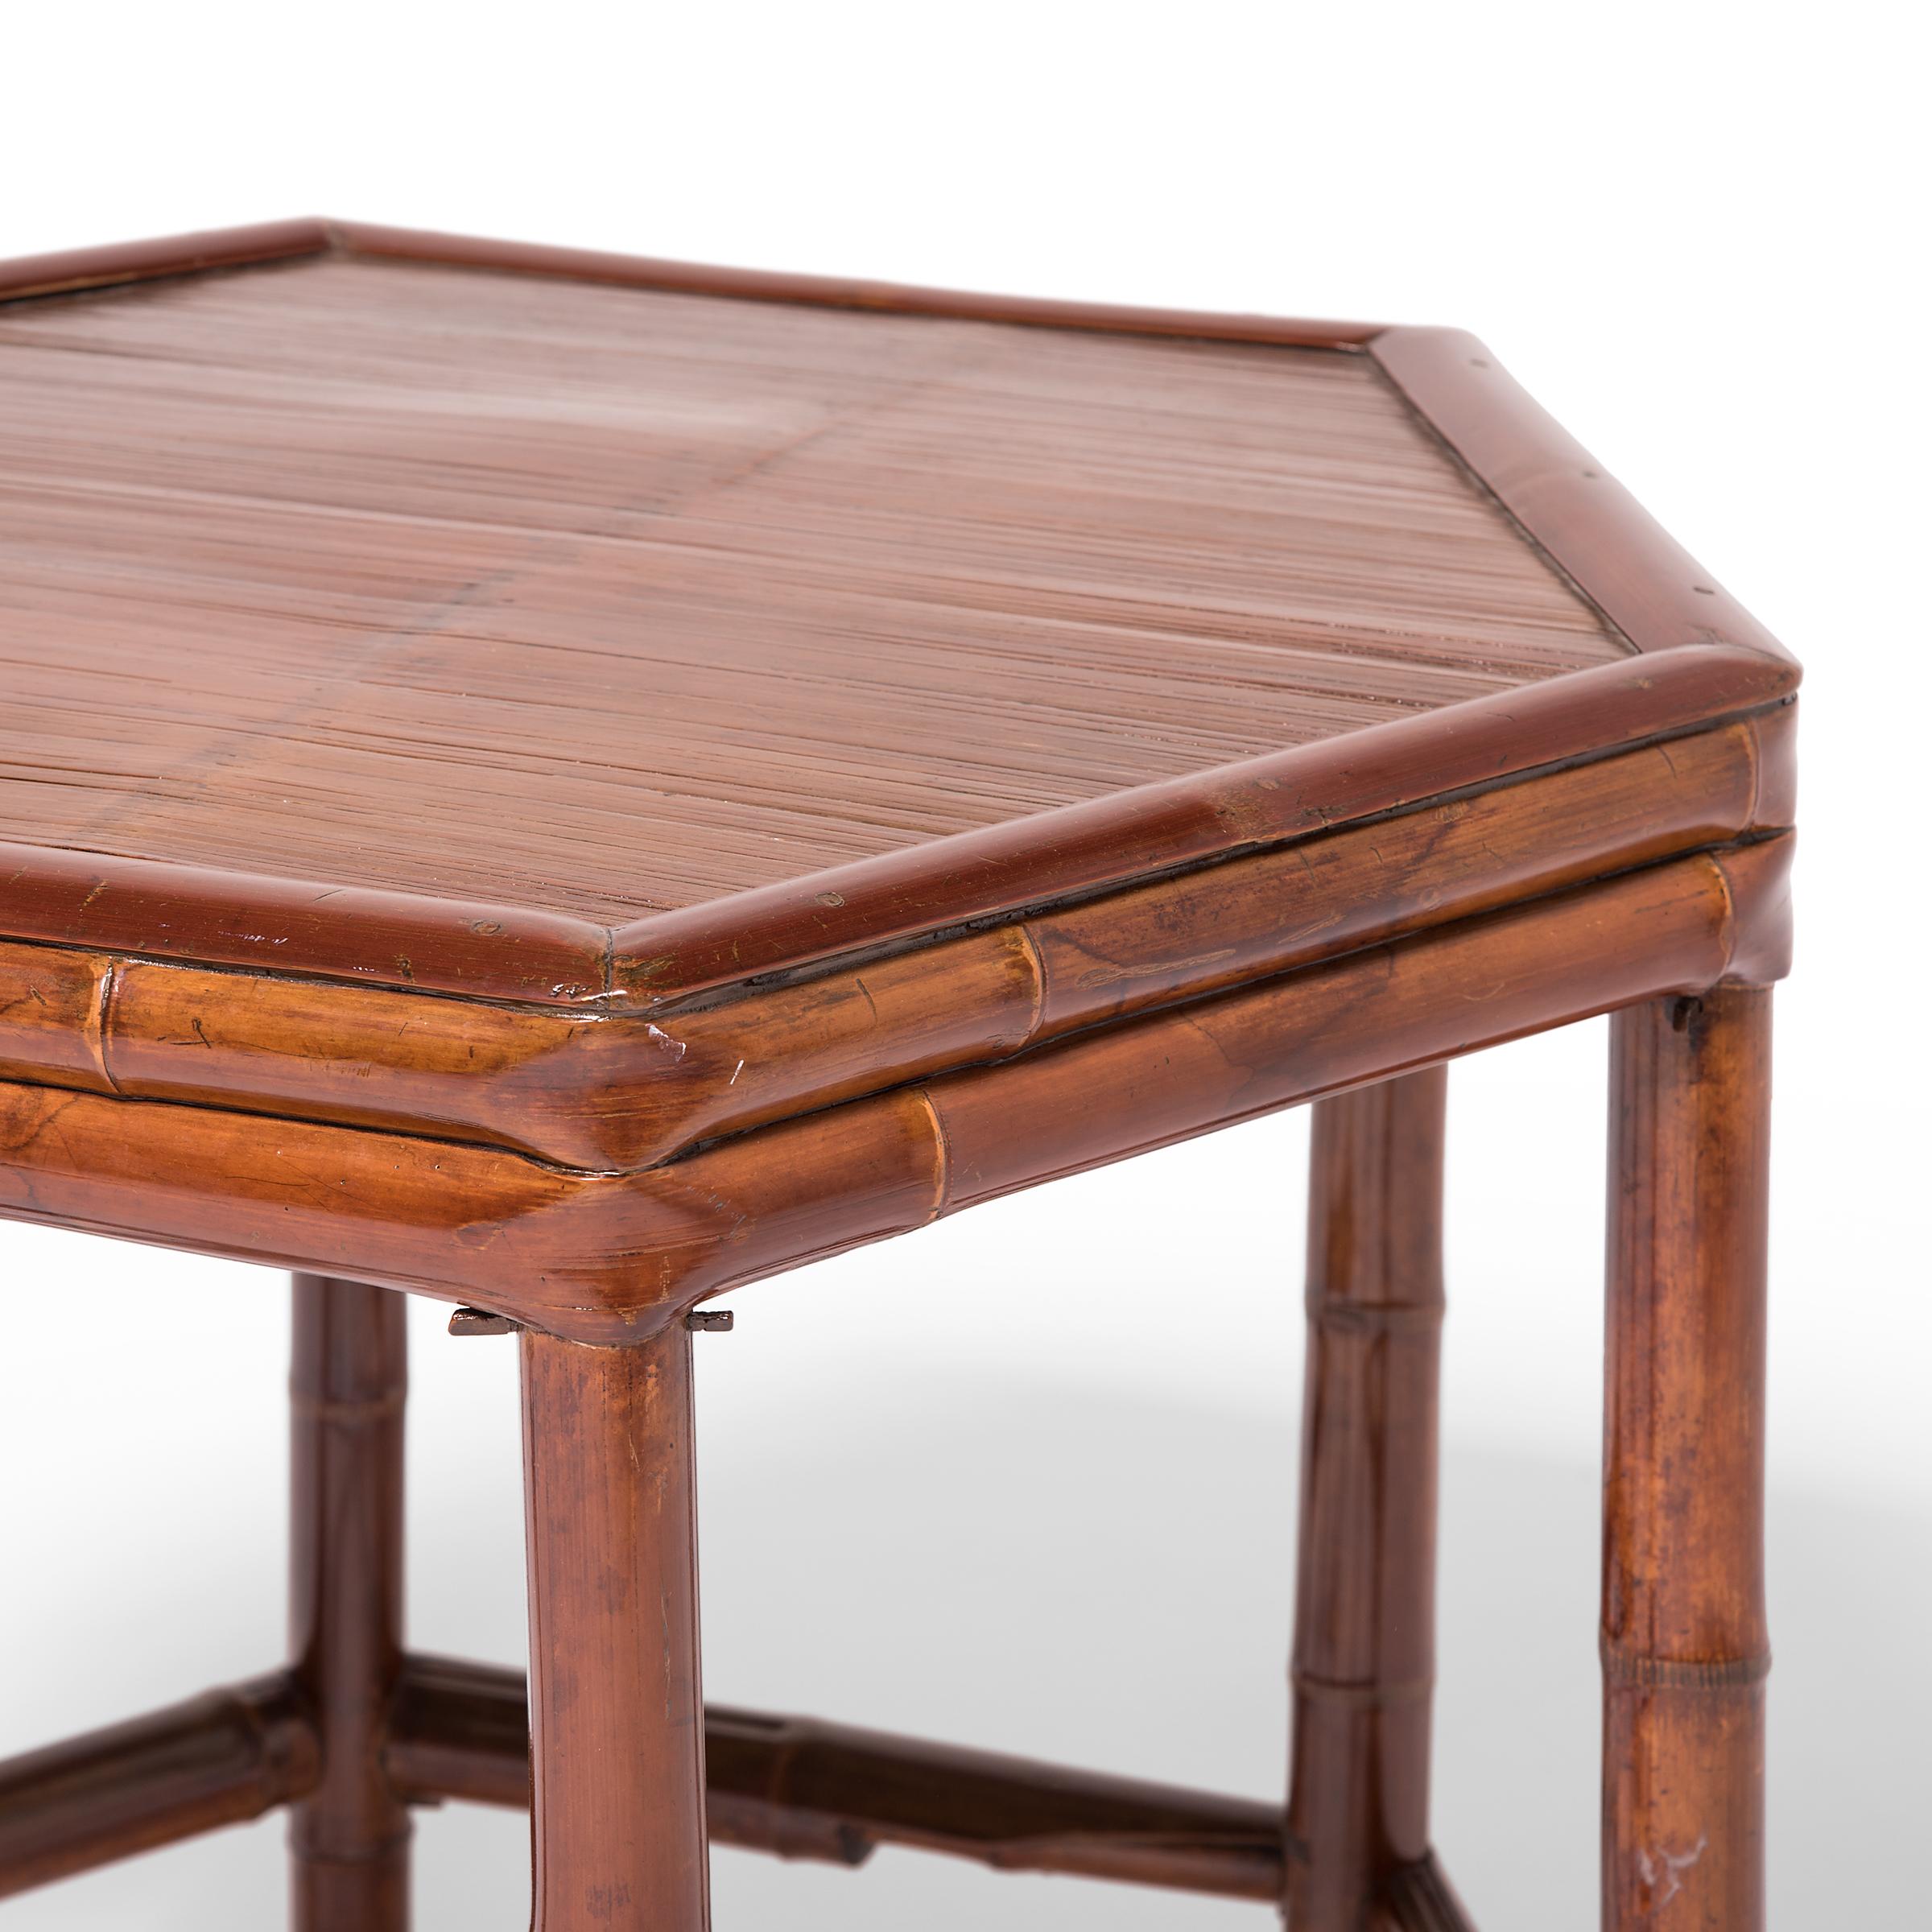 Early 20th Century Chinese Six-Sided Bamboo Table 1